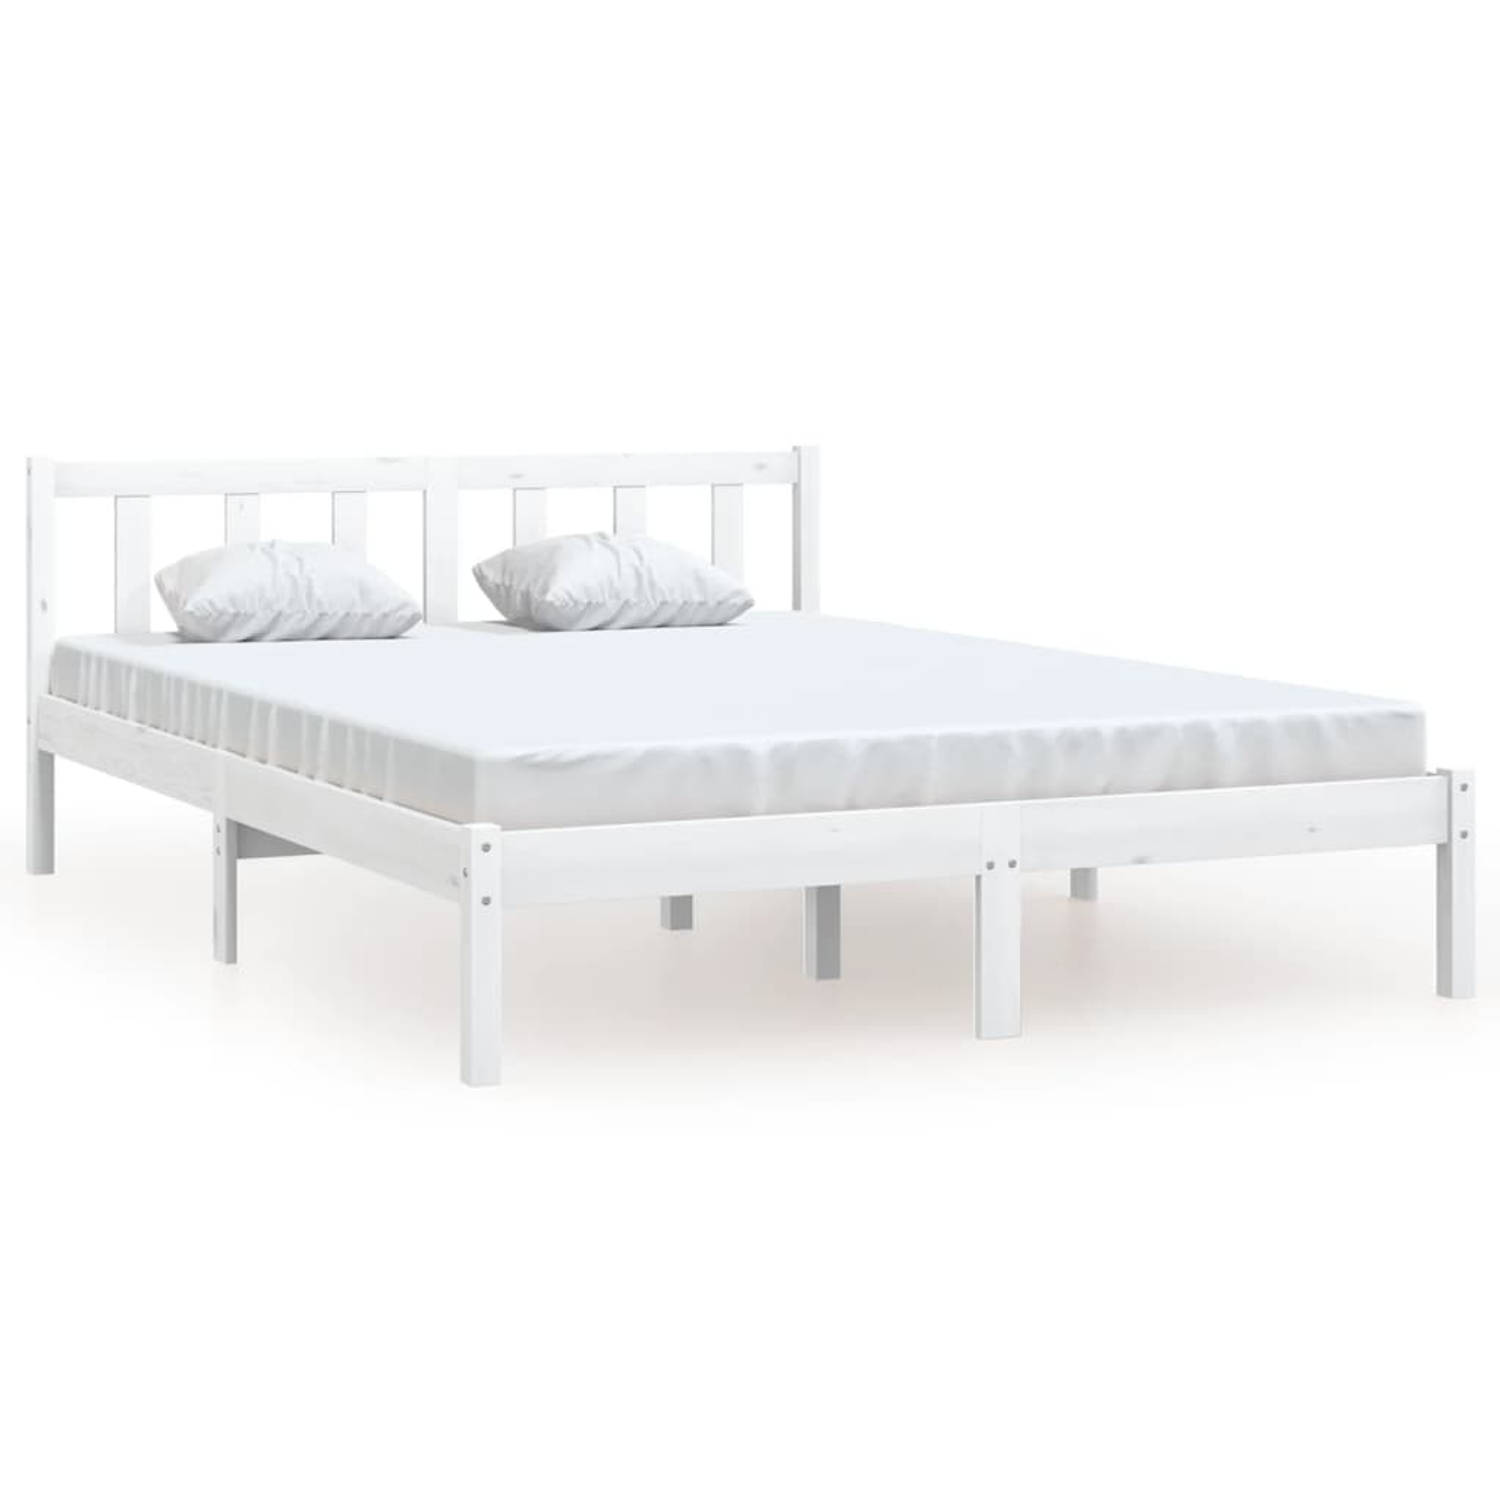 The Living Store Bedframe massief grenenhout wit 140x200 cm - Bedframe - Bedframe - Bed Frame - Bed Frames - Bed - Bedden - 1-persoonsbed - 1-persoonsbedden - Eenpersoons Bed